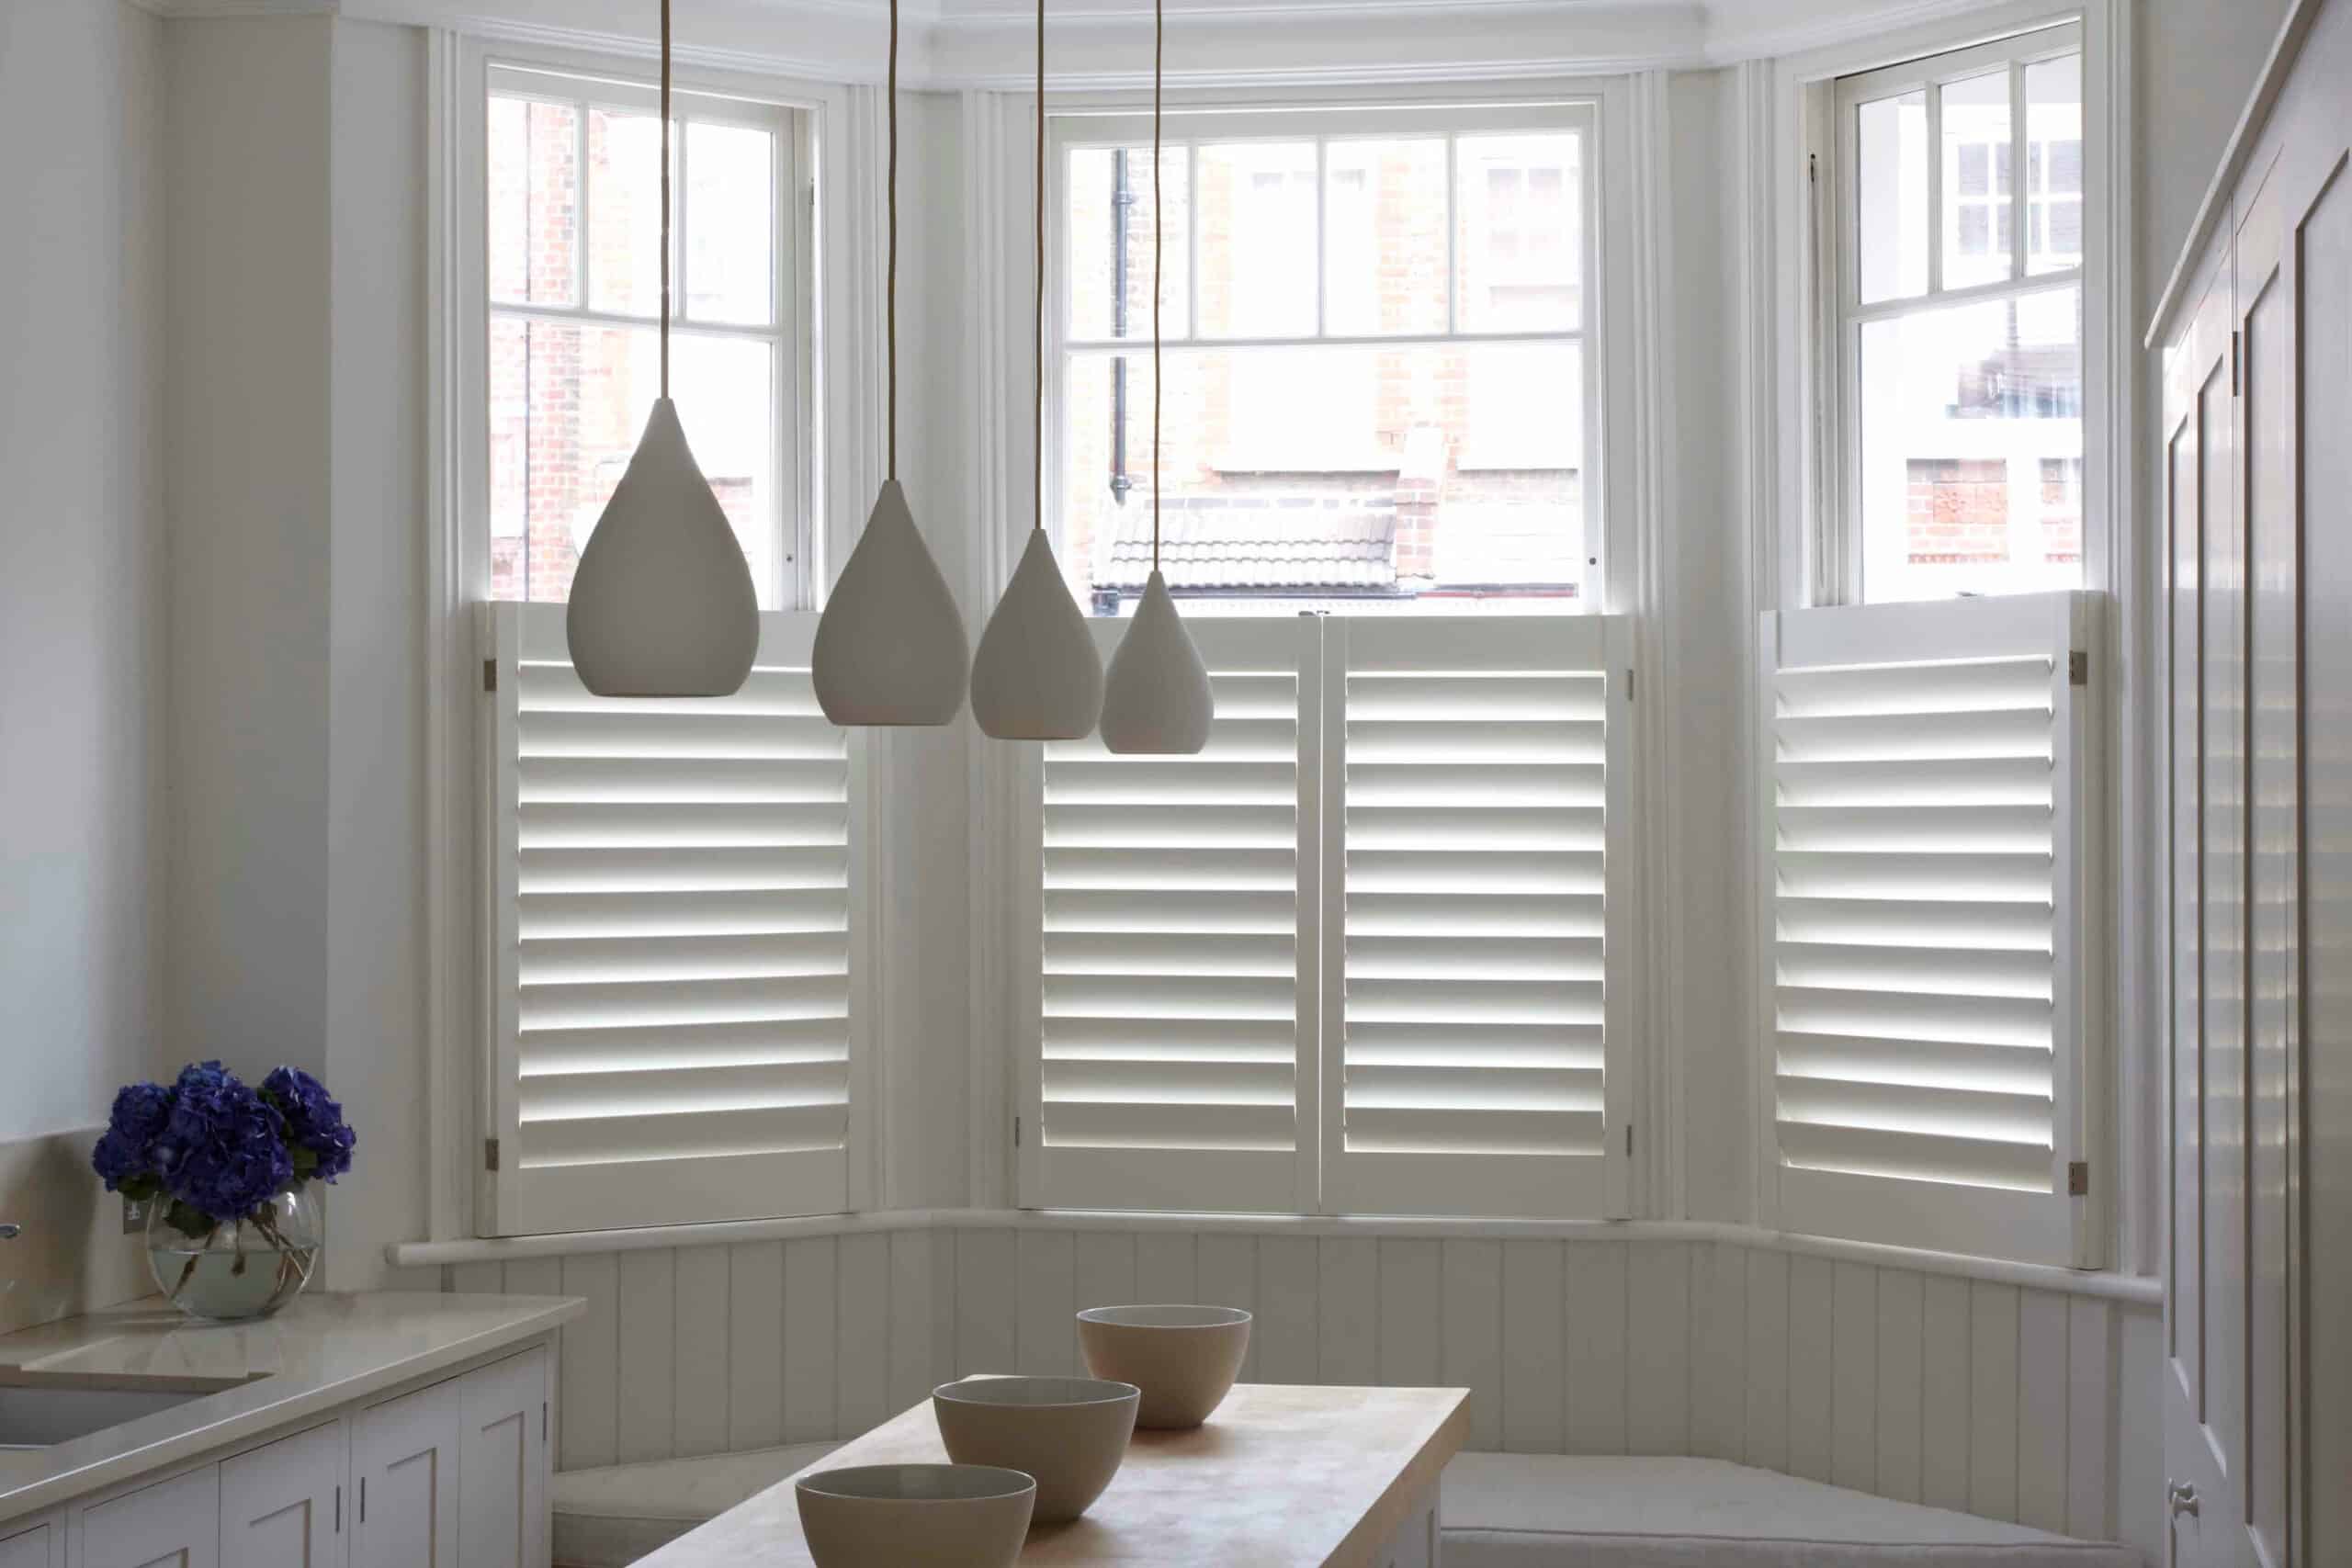 Things to Consider When Choosing the Right Blinds for Your Home